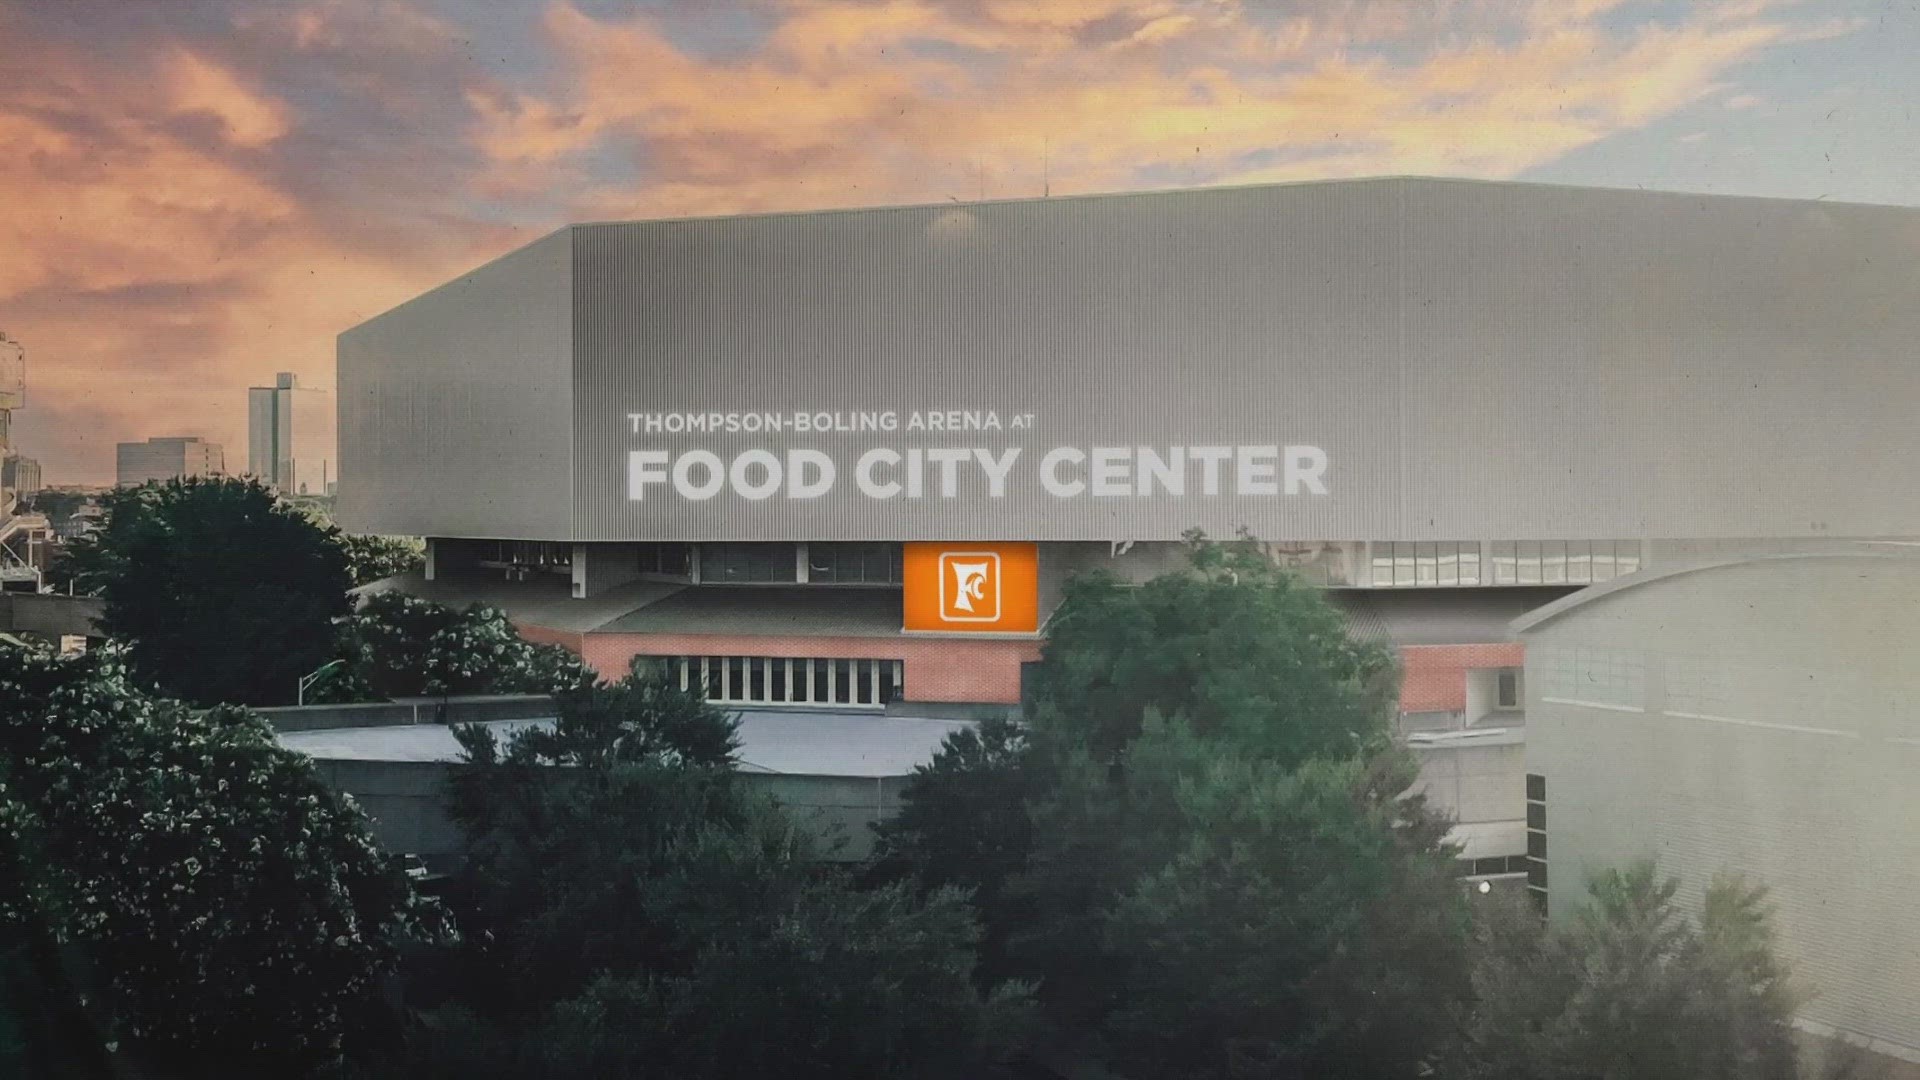 A lot of famous musicians have recently announced tour stops at Thompson-Boling Arena.